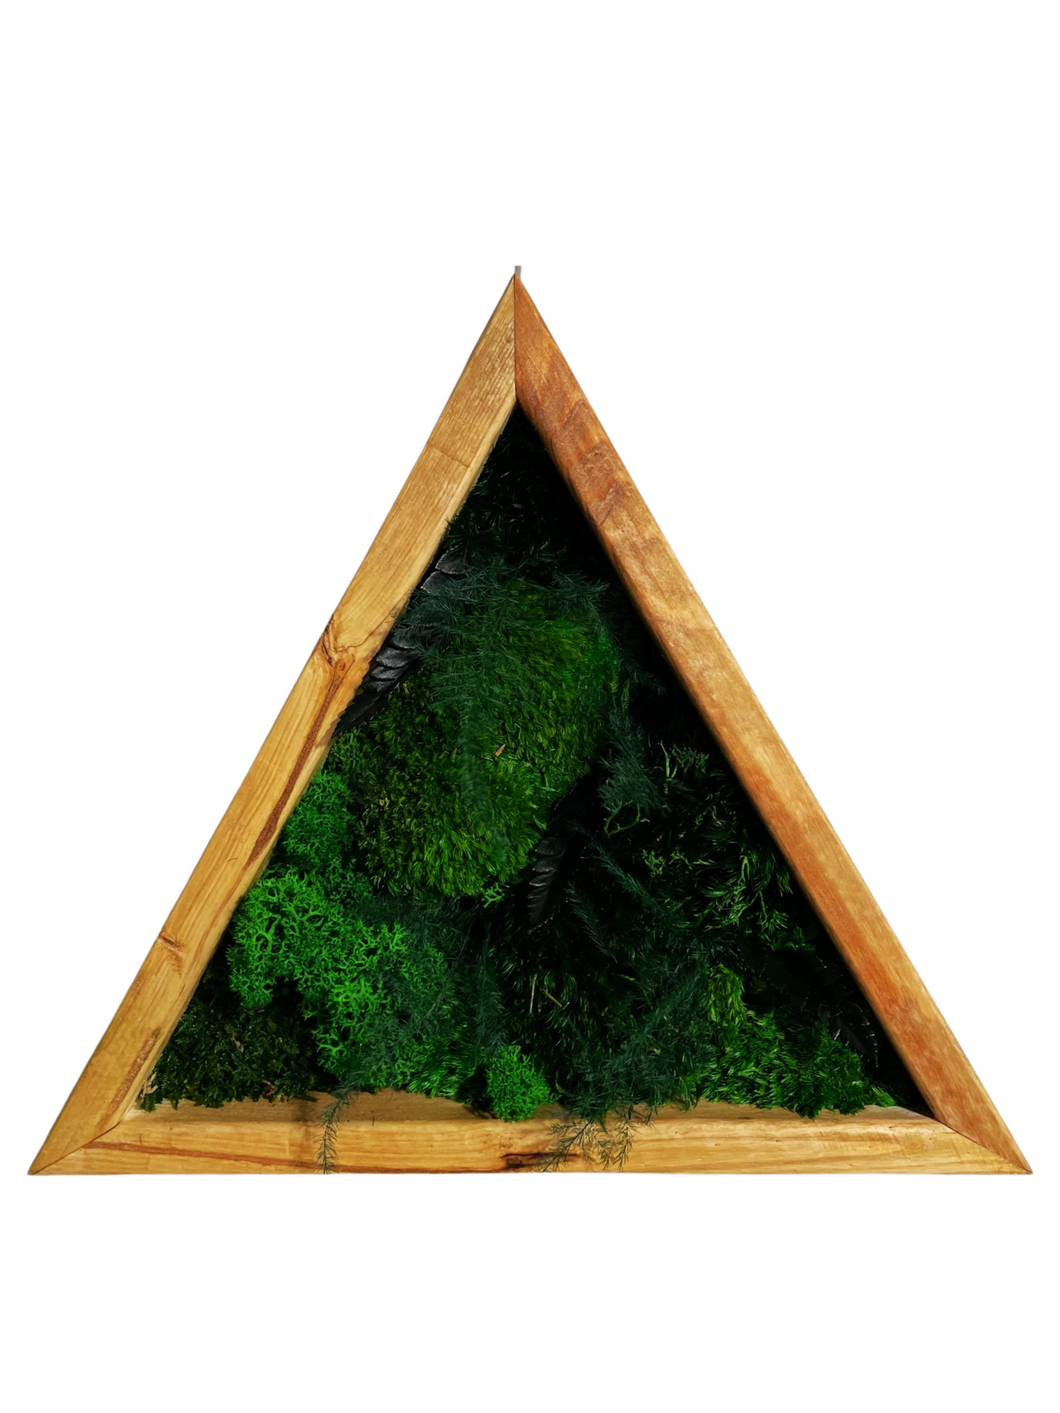 Faerie Bed - Triangle Moss Art